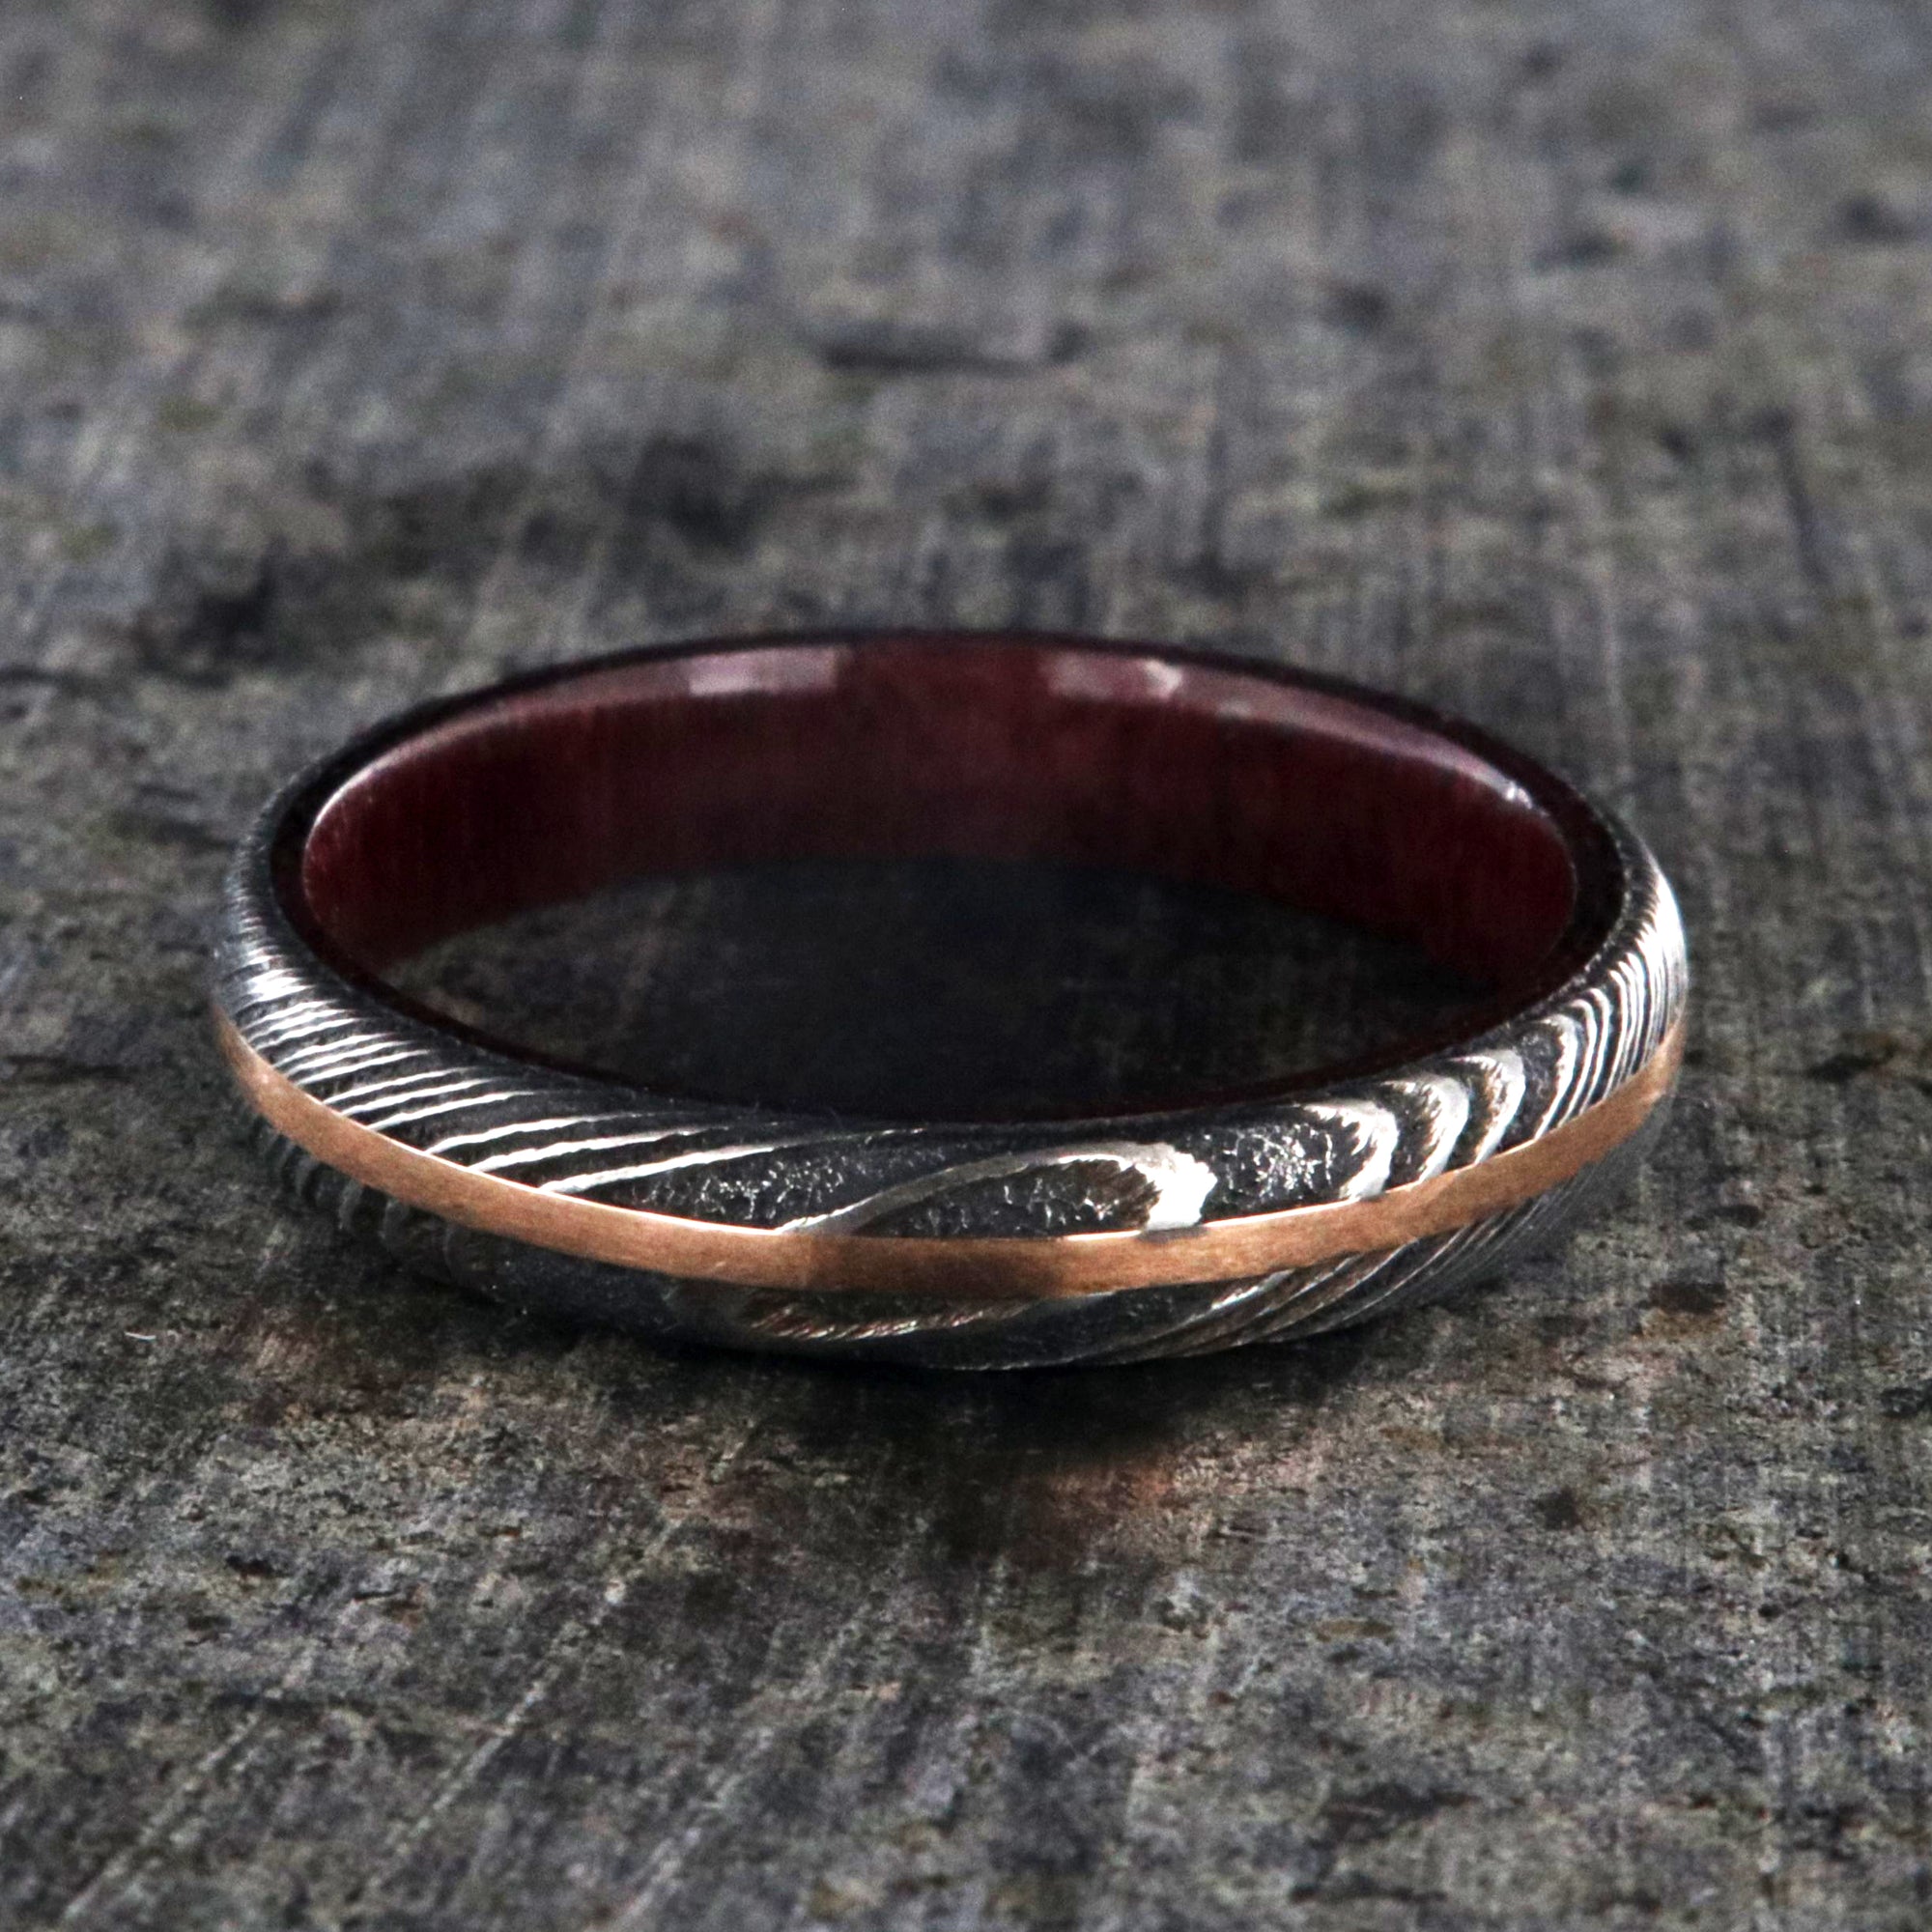 4mm wide women's wedding band made with black Damascus steel with a centered rose gold inlay and purple rain wood sleeve